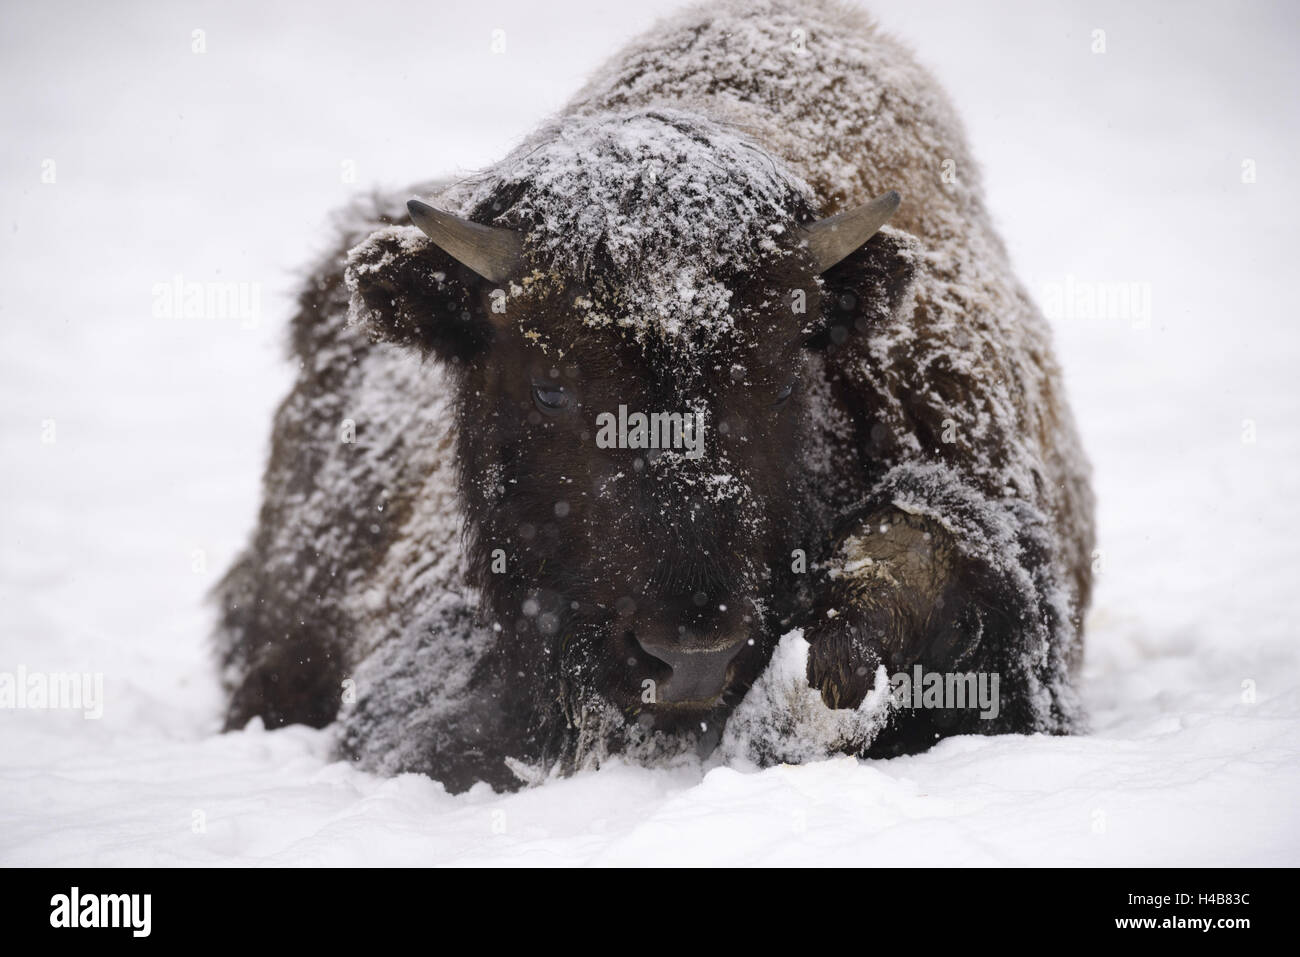 American bison, bison bison, young animal in winter, Stock Photo